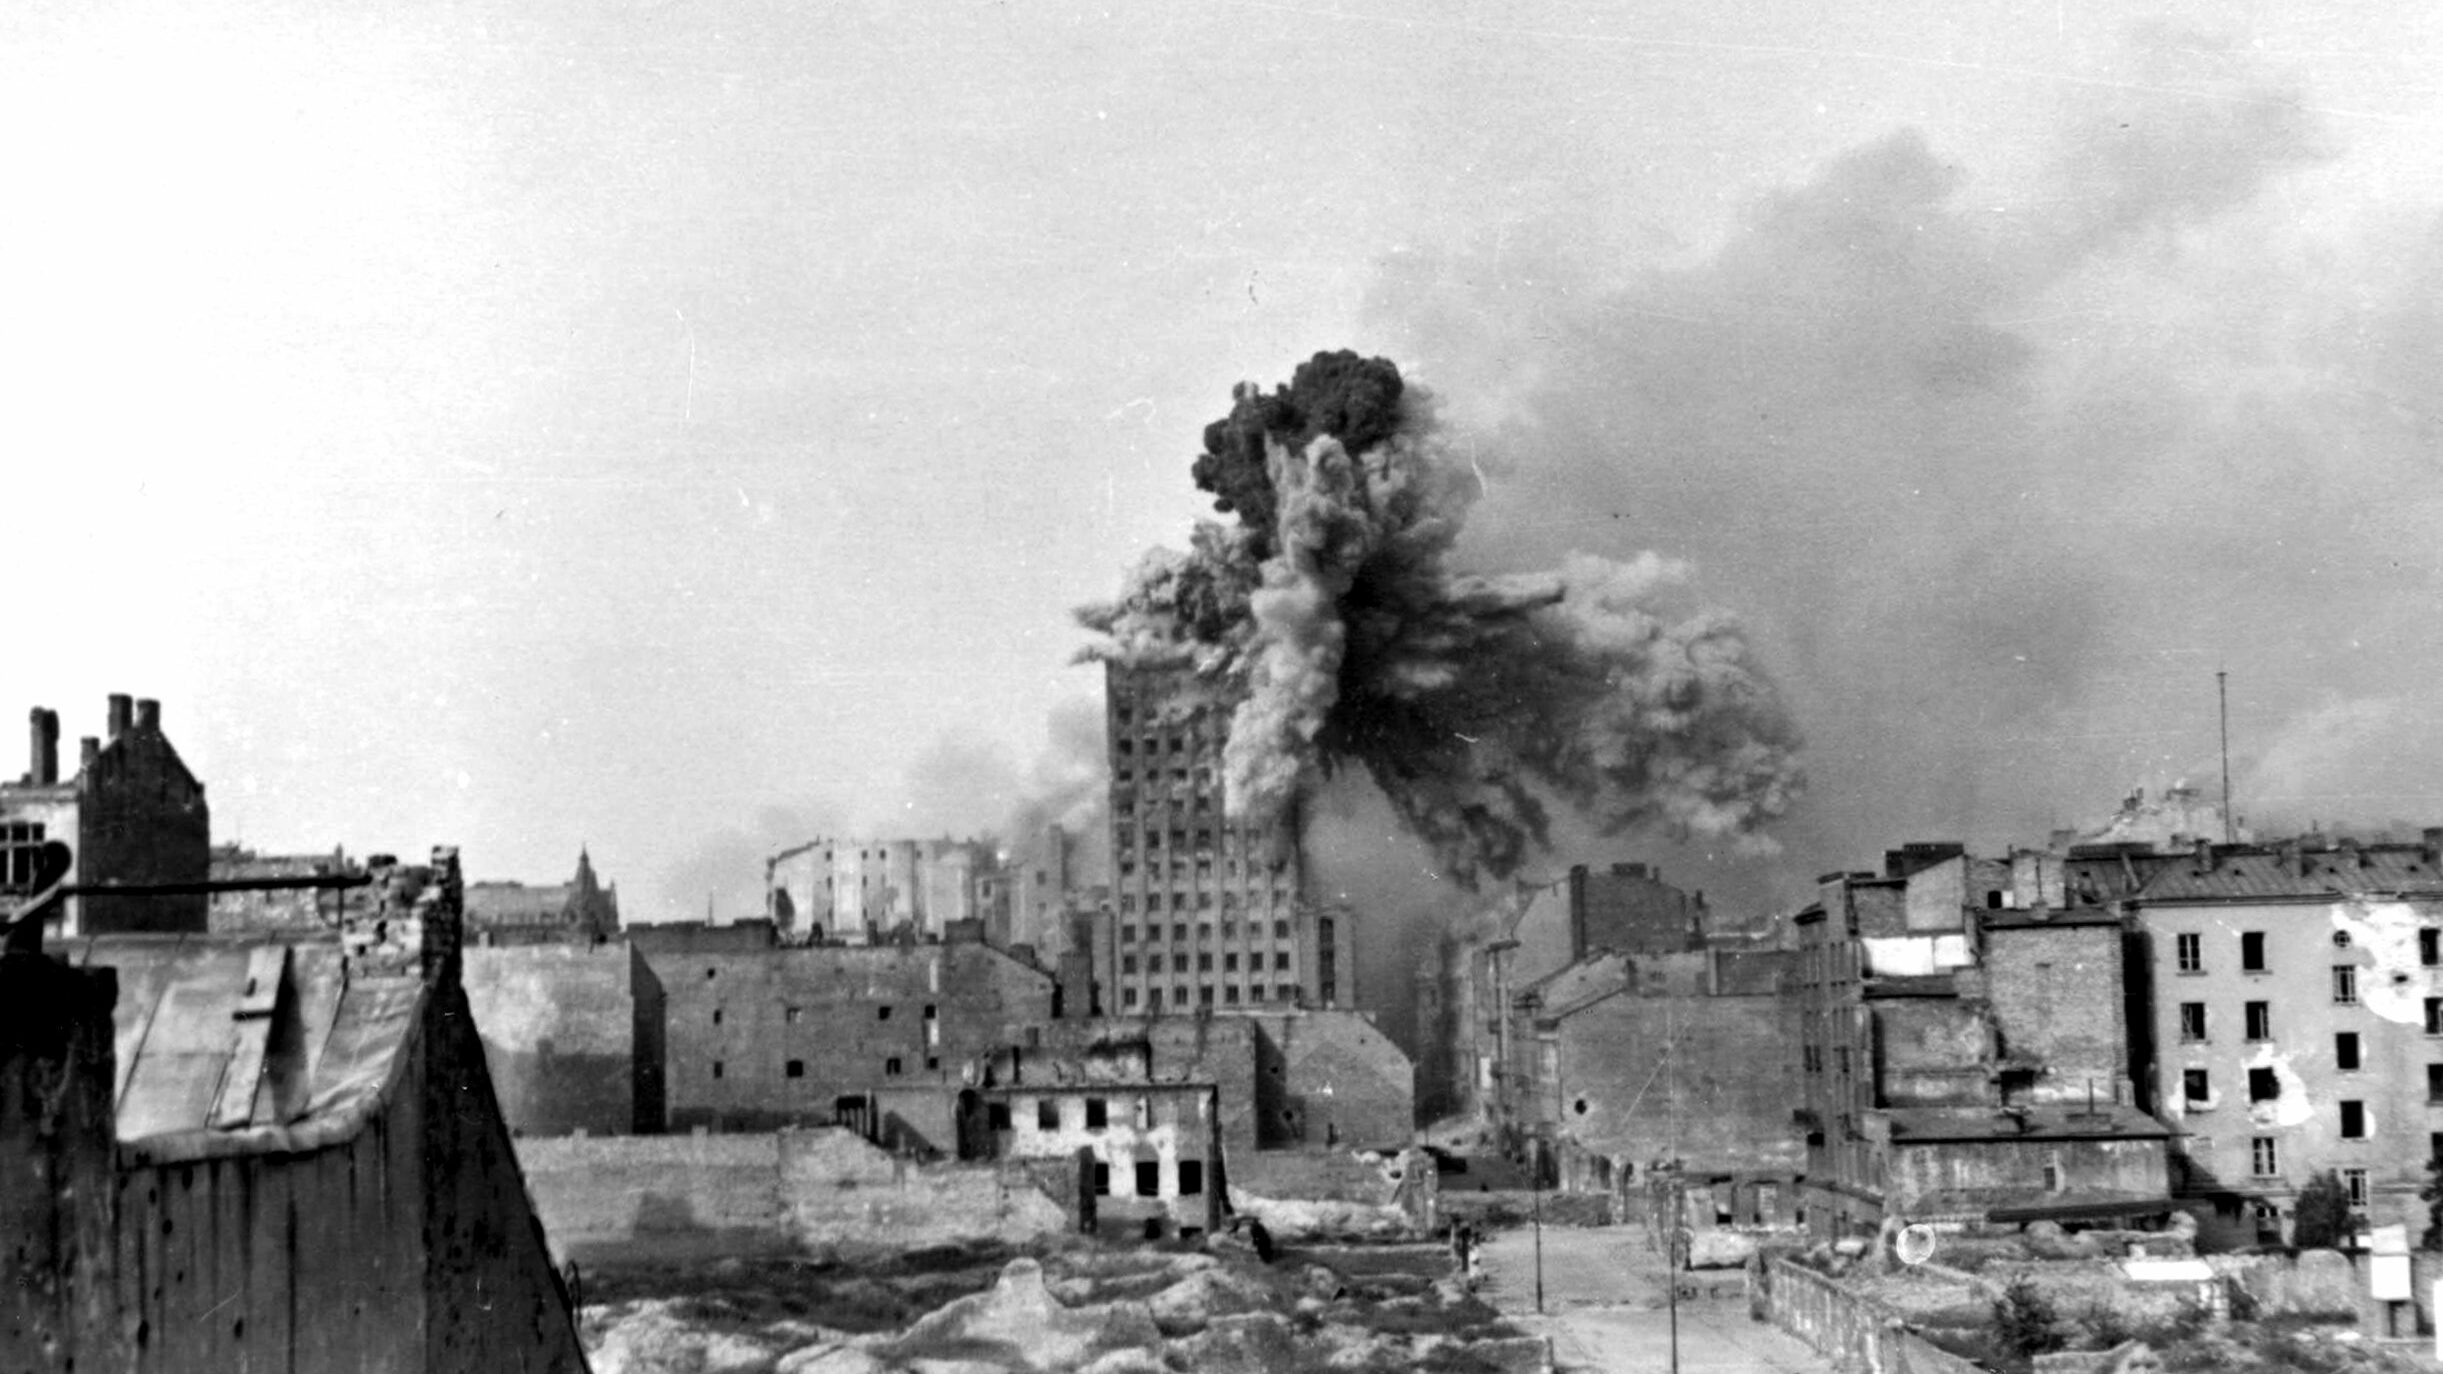 A round from a German 600-mm “Karl-Gerät” explodes against the Prudential Building, Warsaw’s tallest structure. The self-propelled seige mortar, along with tanks, artillery, and Luftwaffe bombers, were used to level the city.